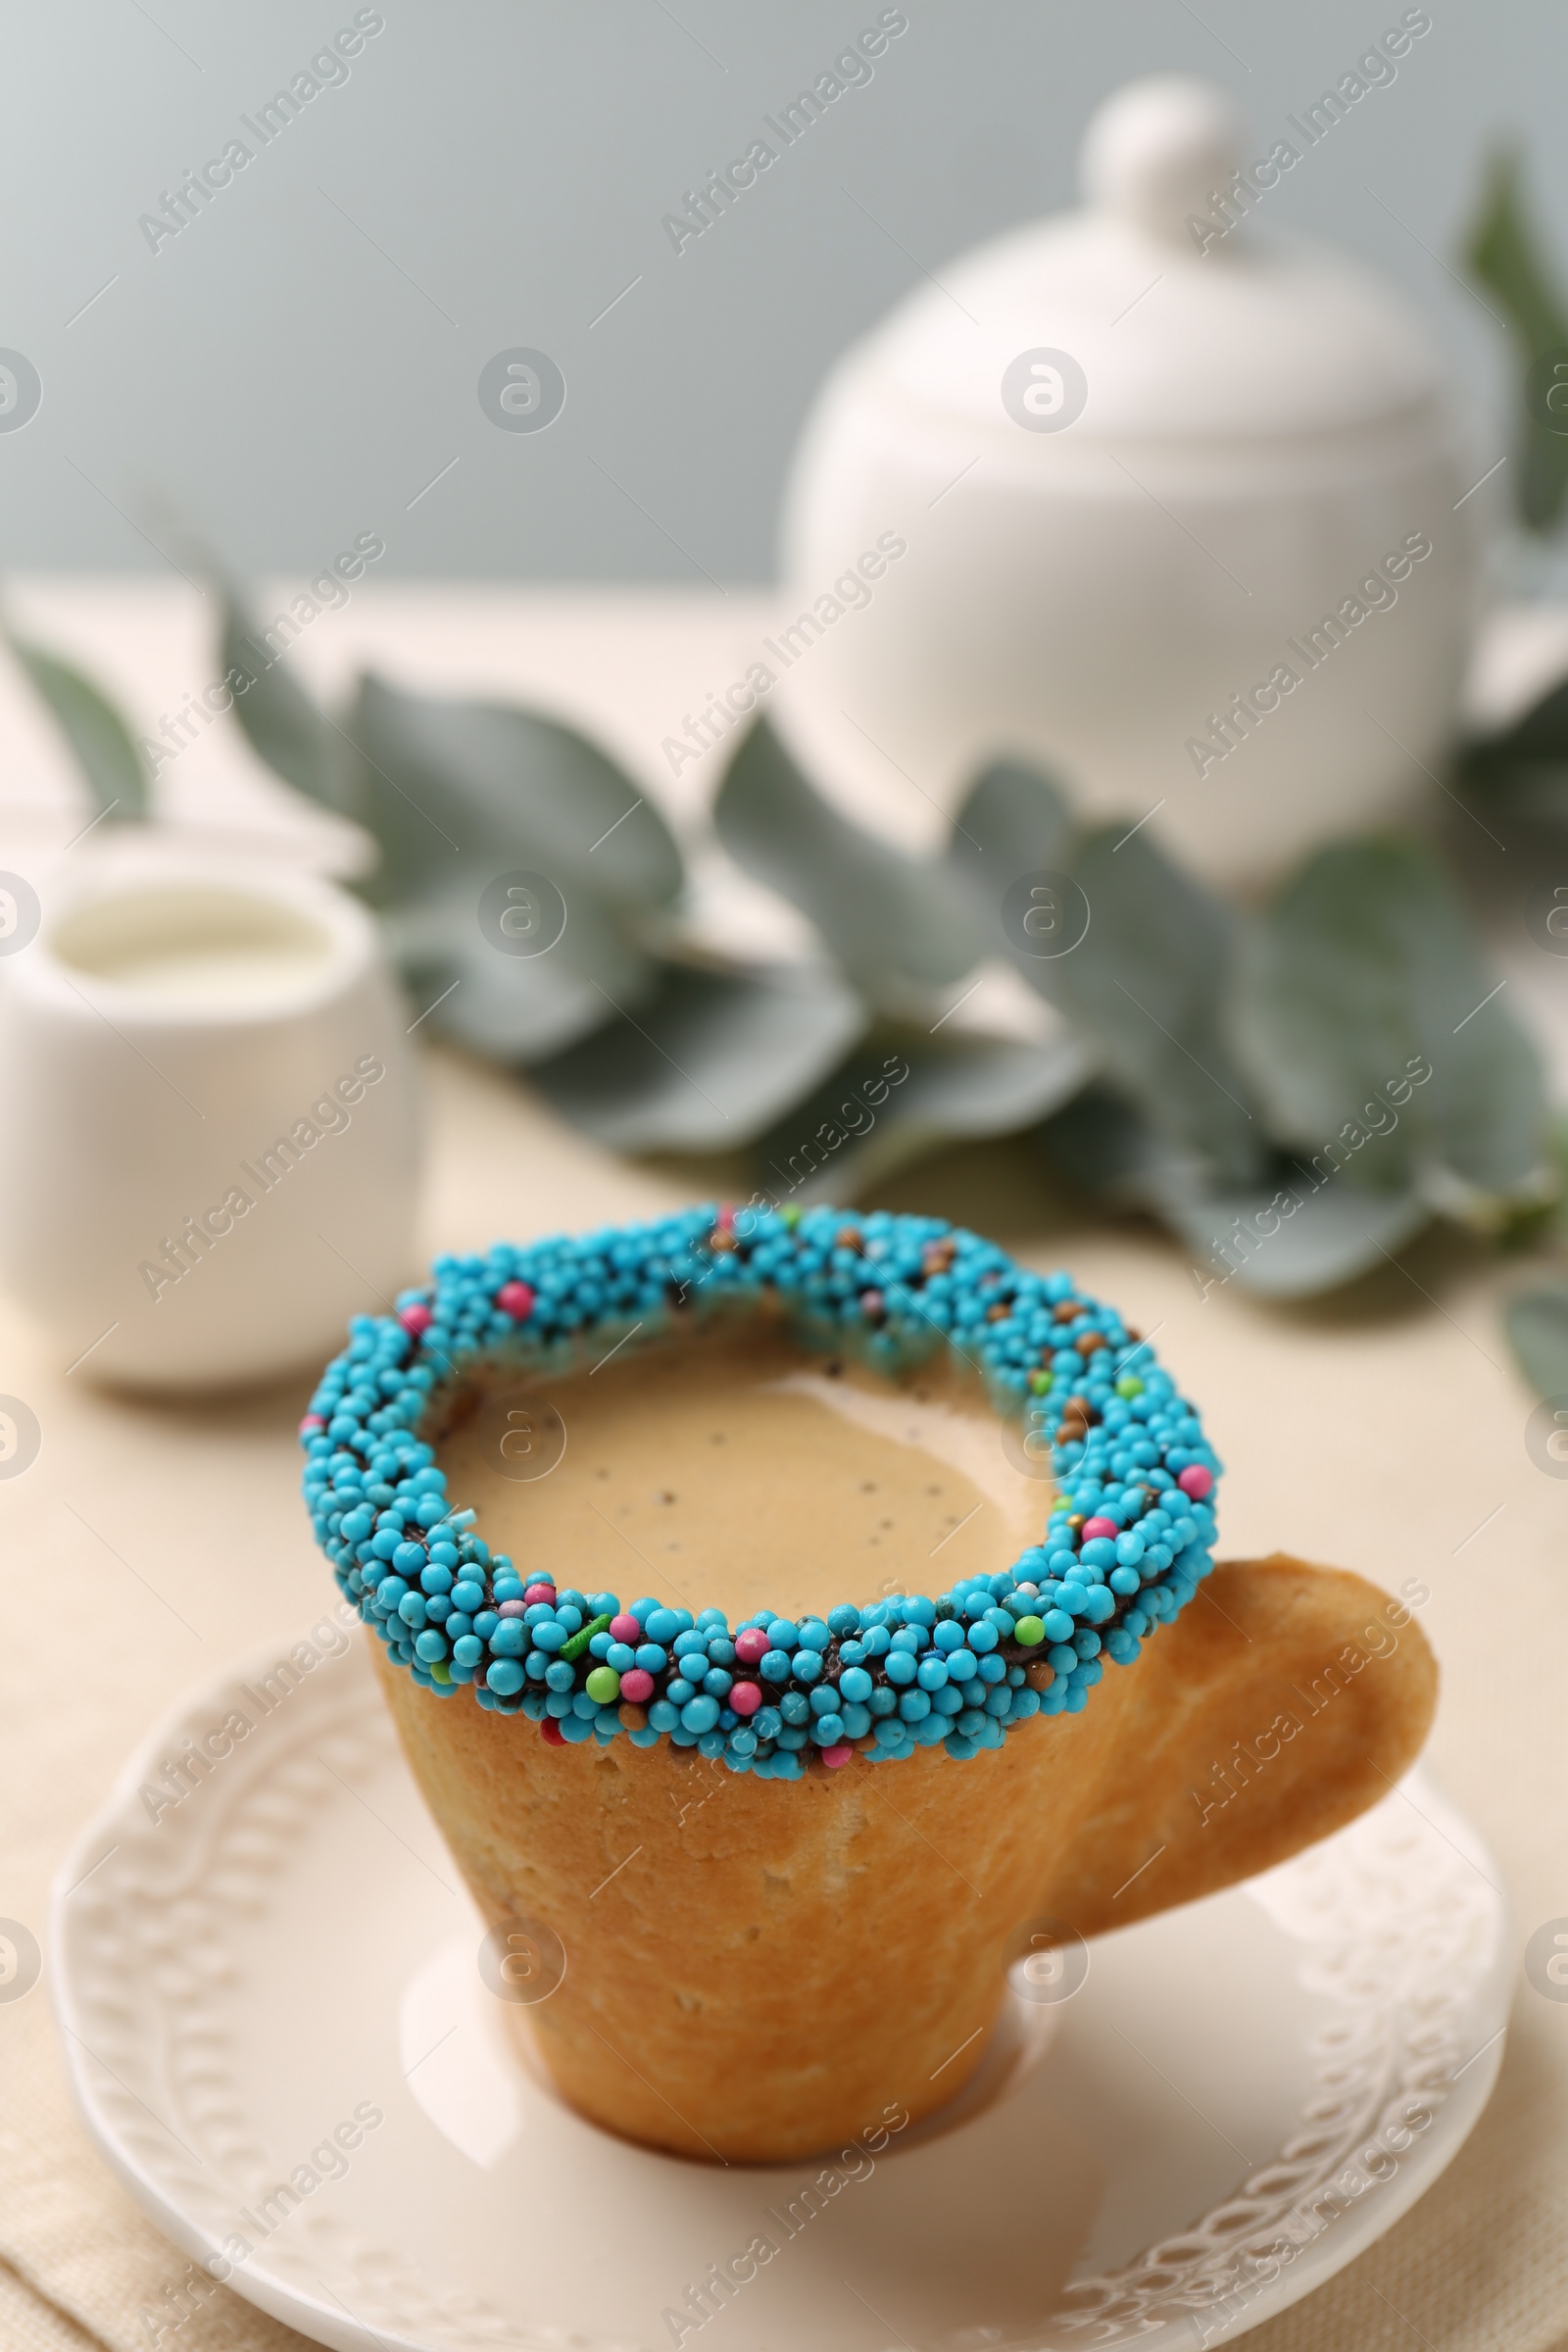 Photo of Delicious edible biscuit cup of espresso decorated with sprinkles on table